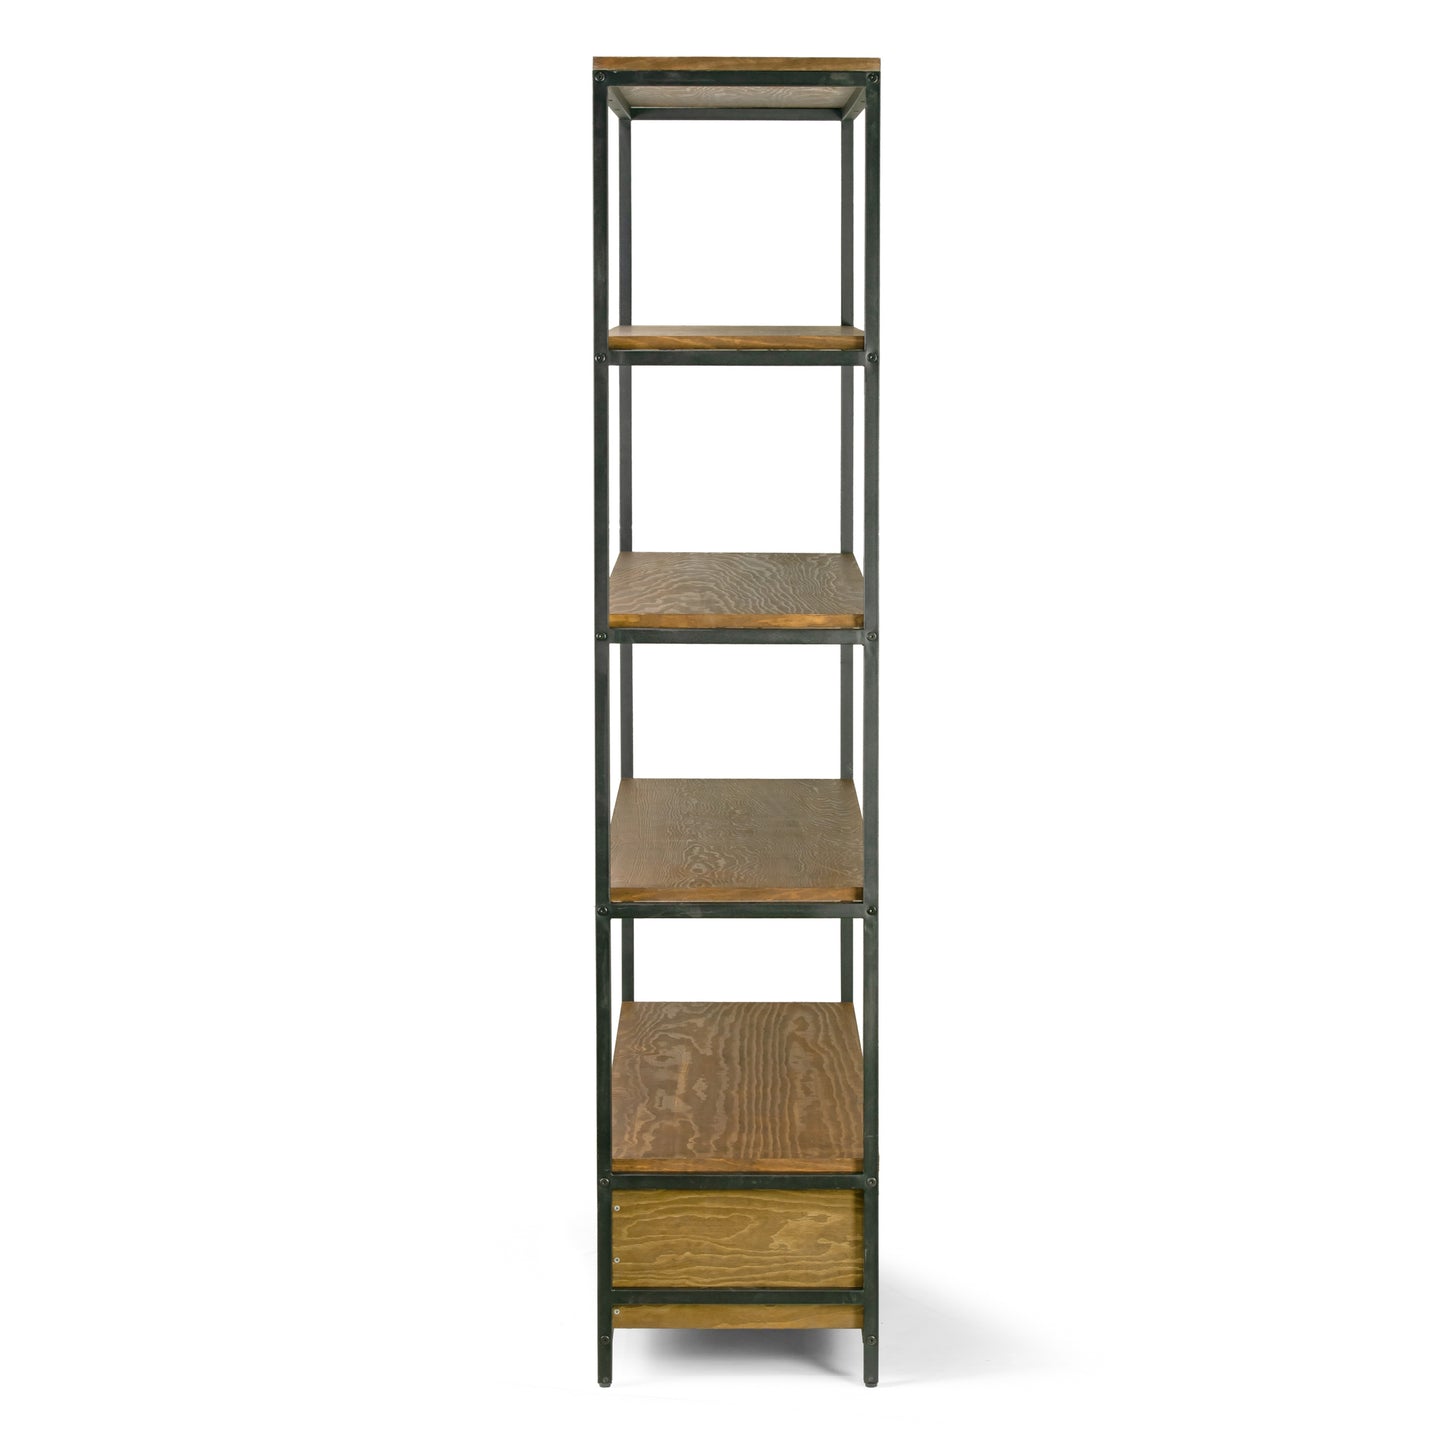 Alta Brown Pine Wood Display Shelf Etagere Metal Frame Bookcase with Drawers